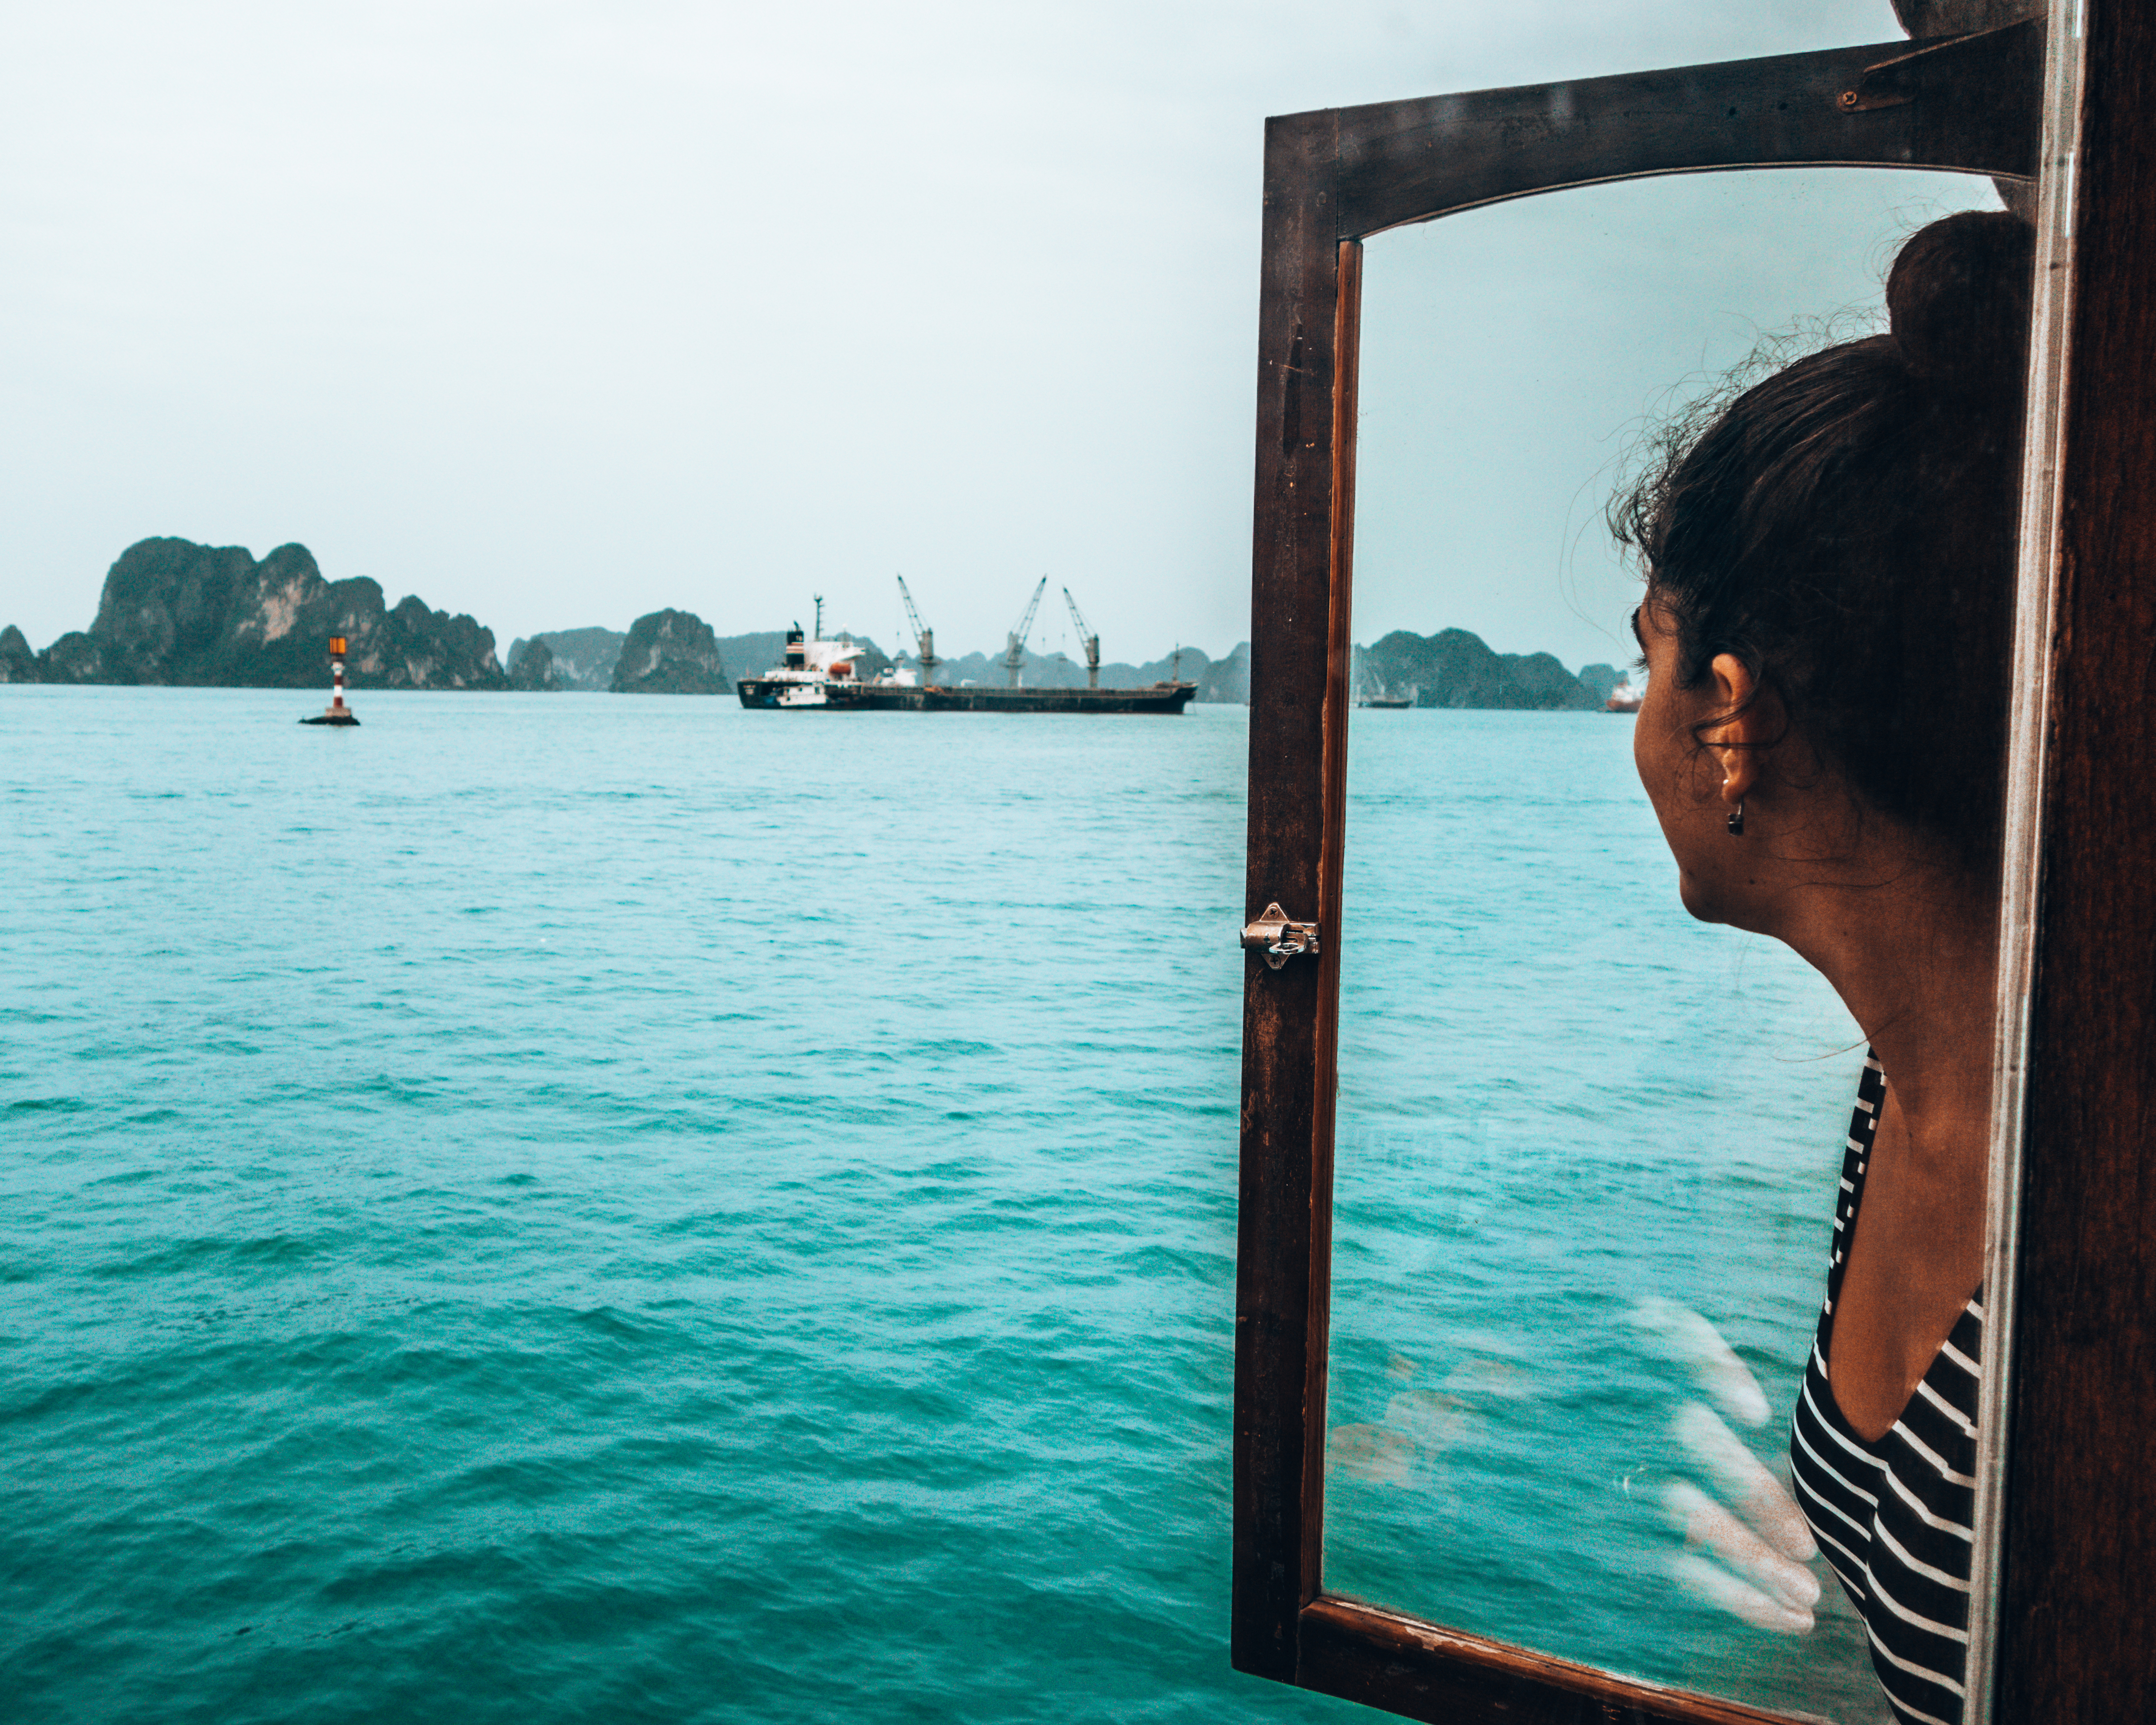 Carine gazing out the boat in Halong Bay Vietnam